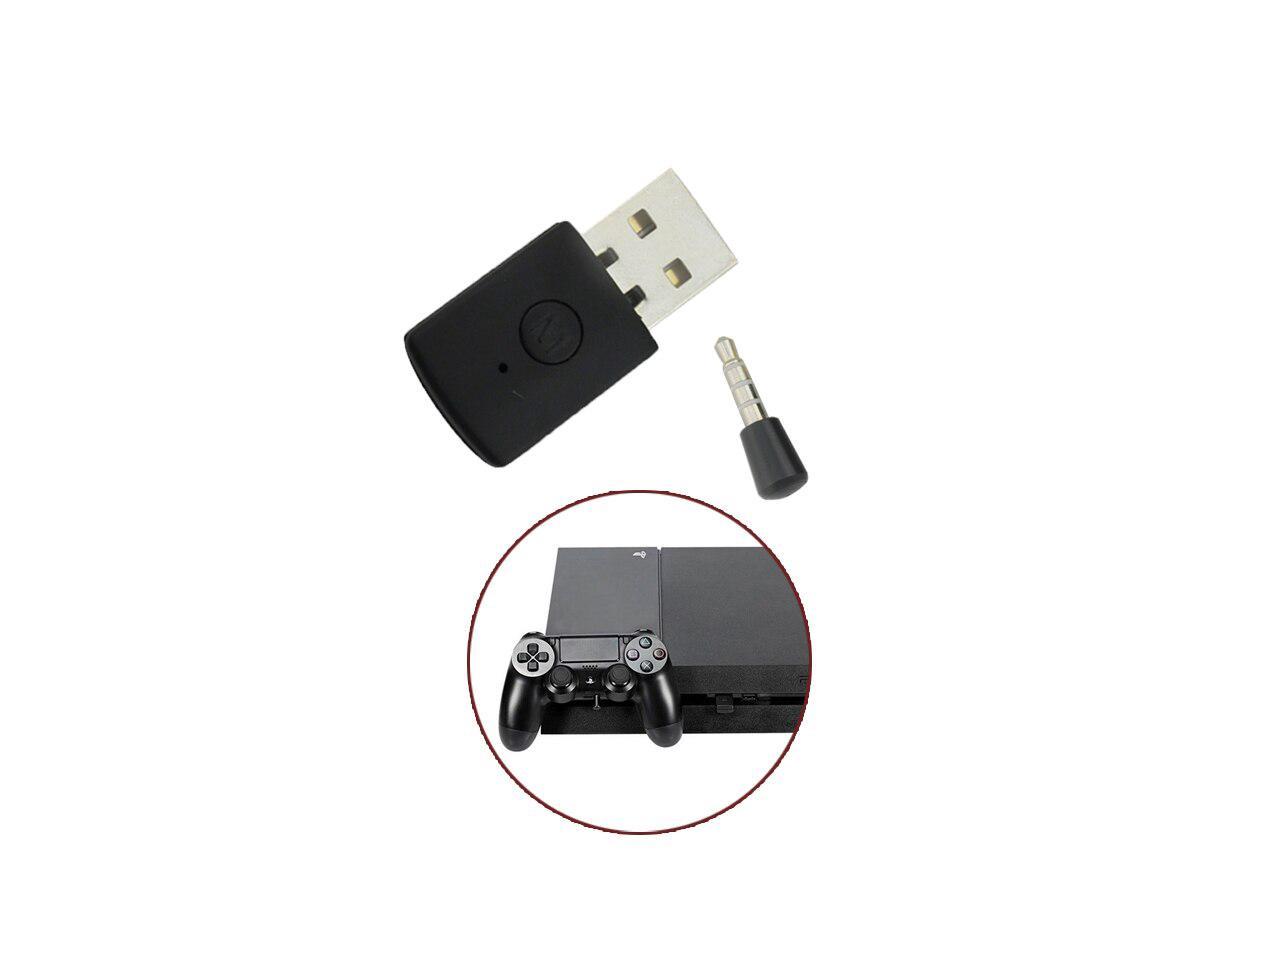 USB receiver wireless bluetooth Adapter dongle for PS4 for Playstation 4 gamepad controller joystick (1 pcs)